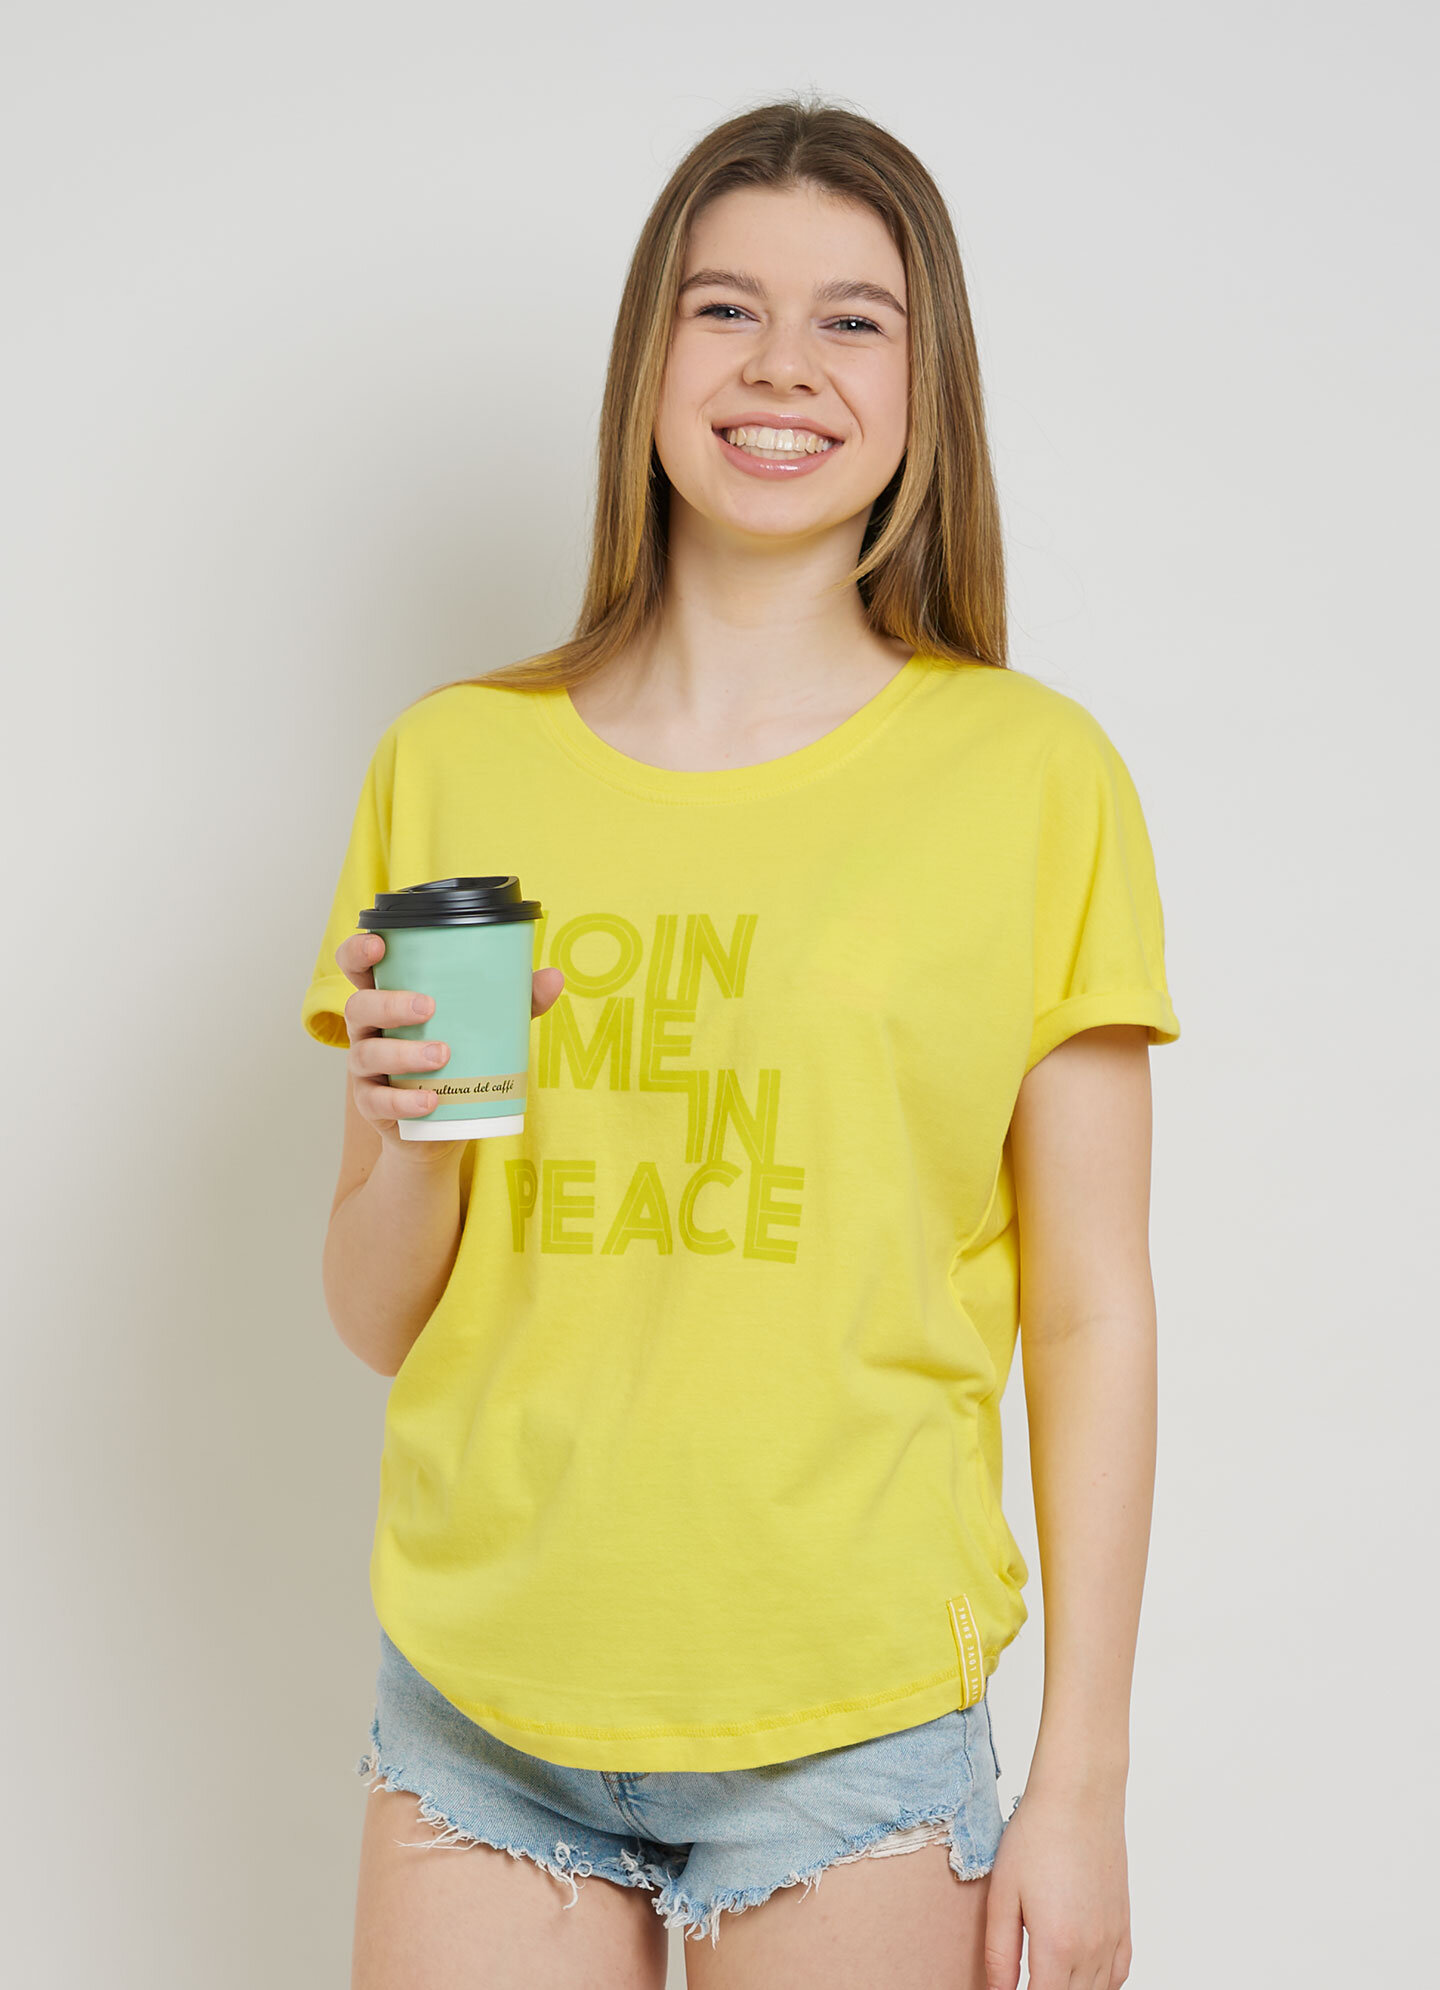 sparkles of light boxy t shirt 115 1 yellow bust 00371 w